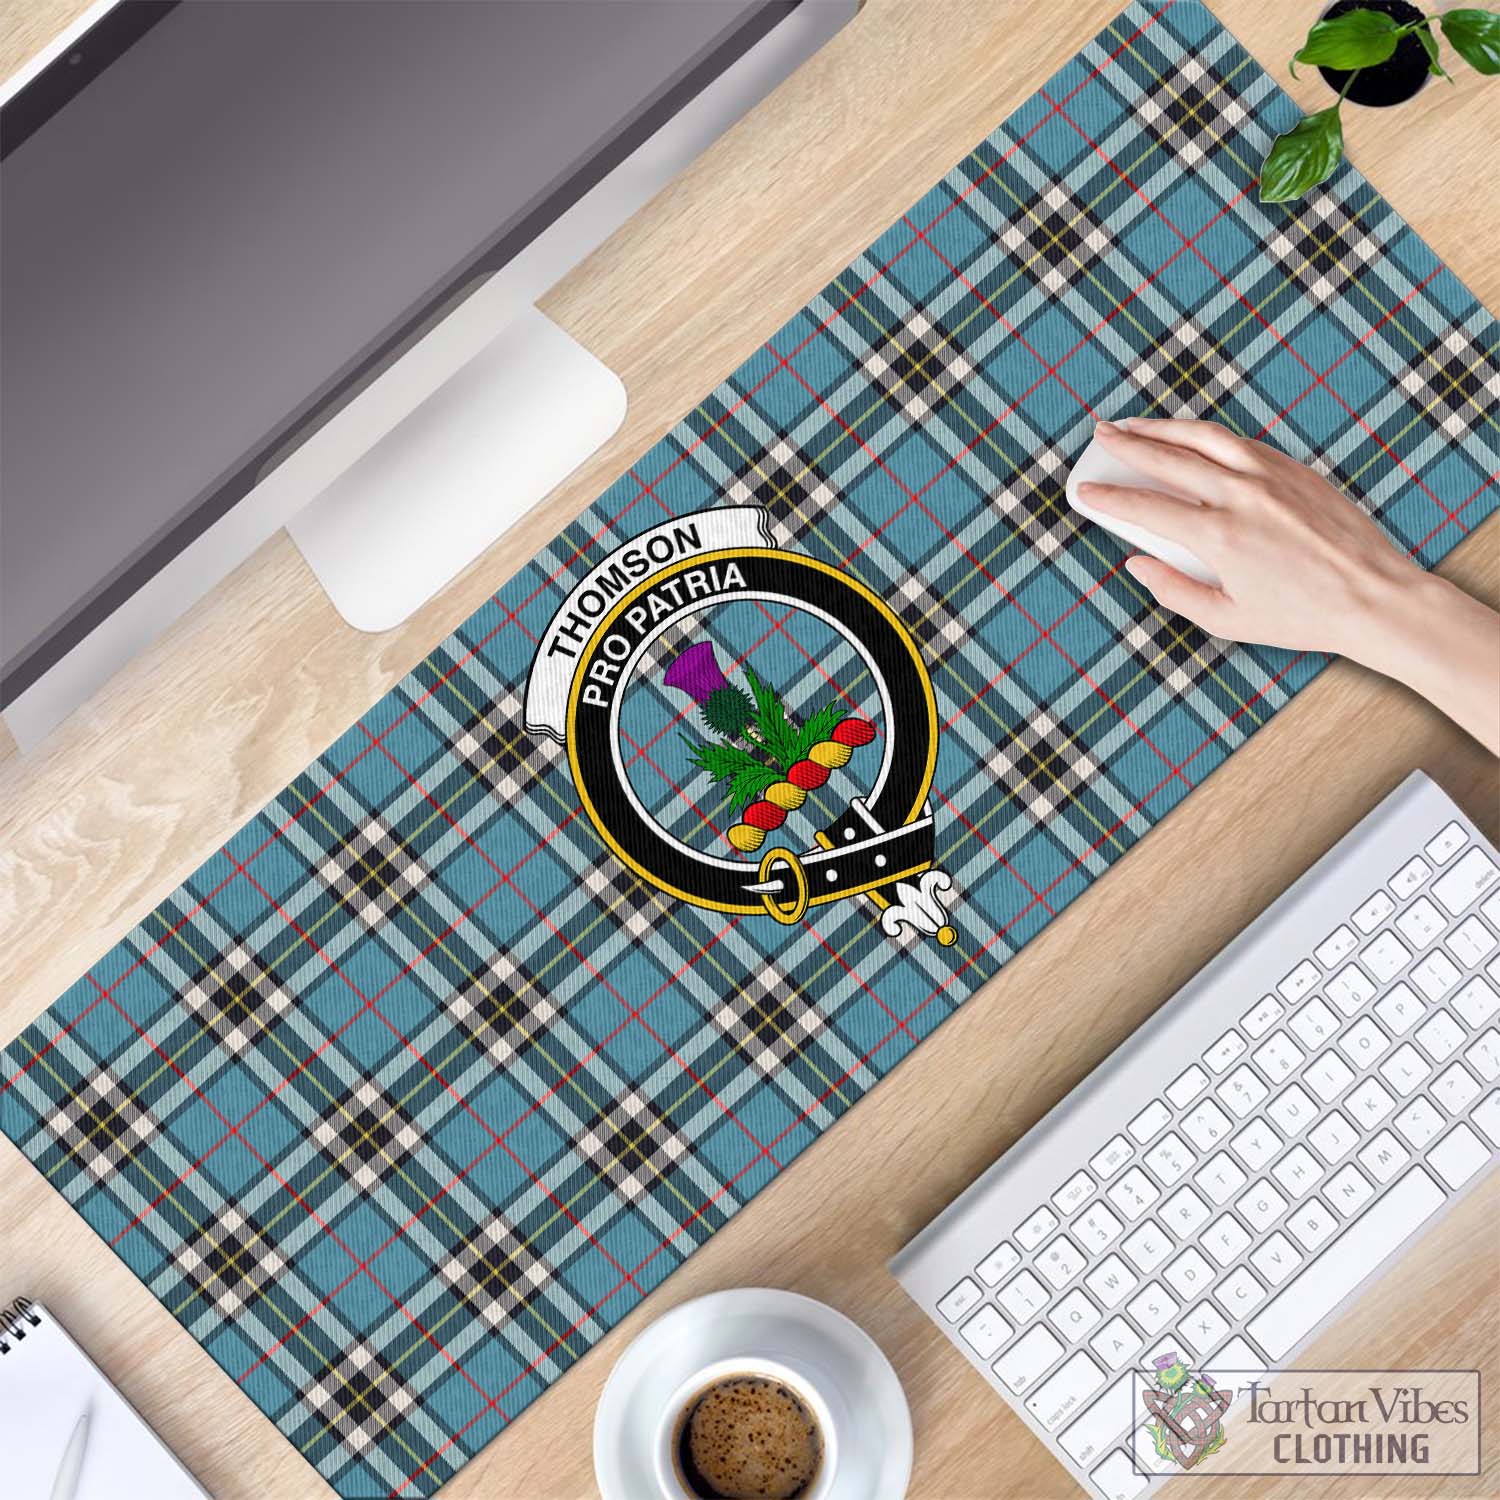 Tartan Vibes Clothing Thomson Tartan Mouse Pad with Family Crest